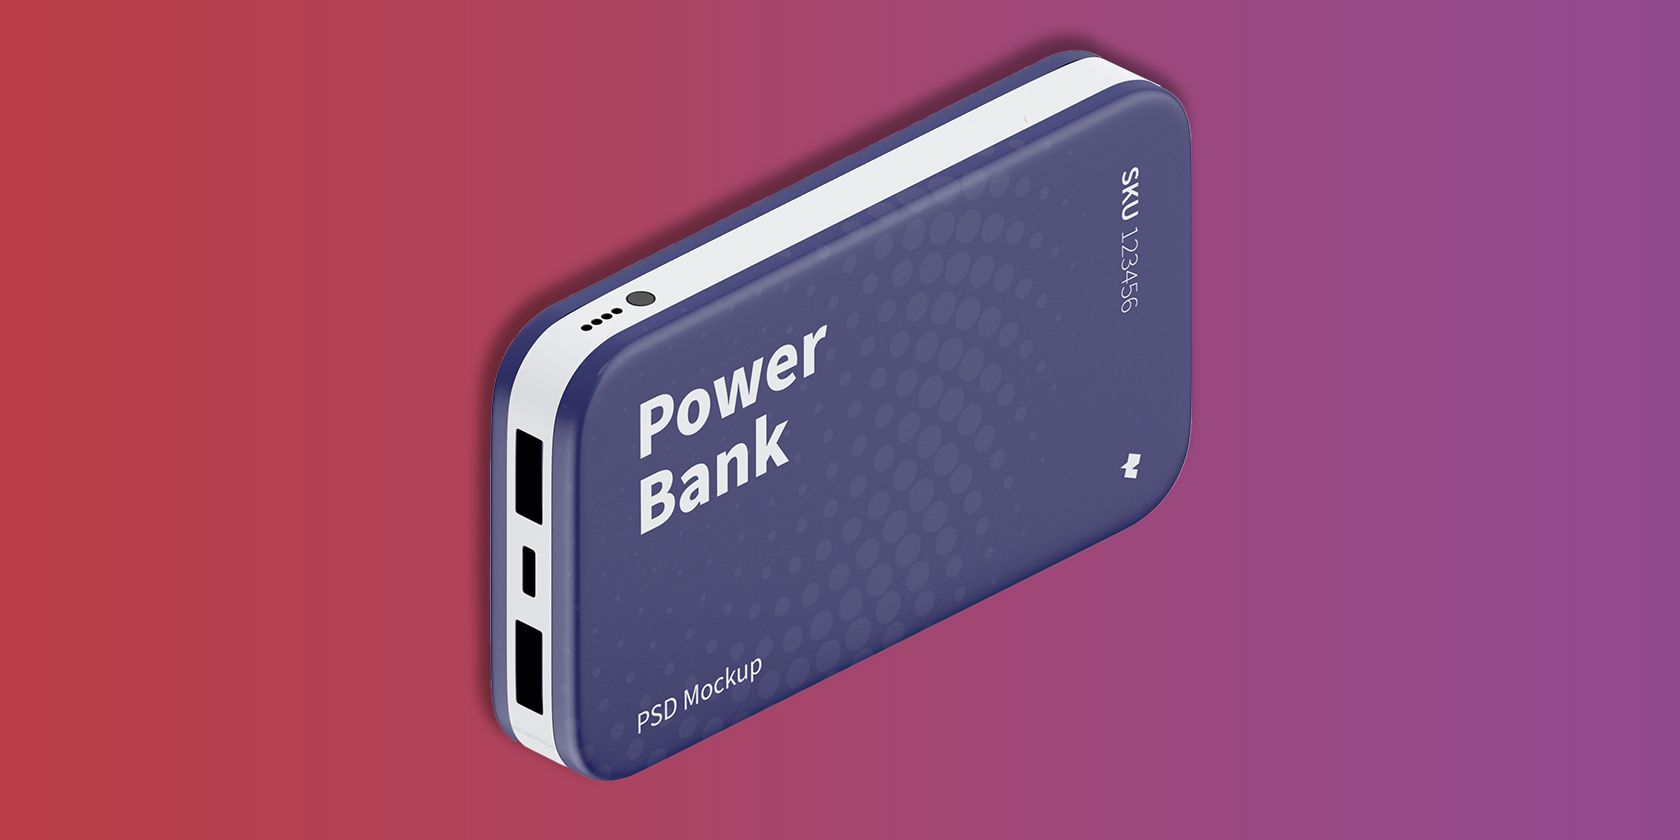 Laptop power bank with a red background